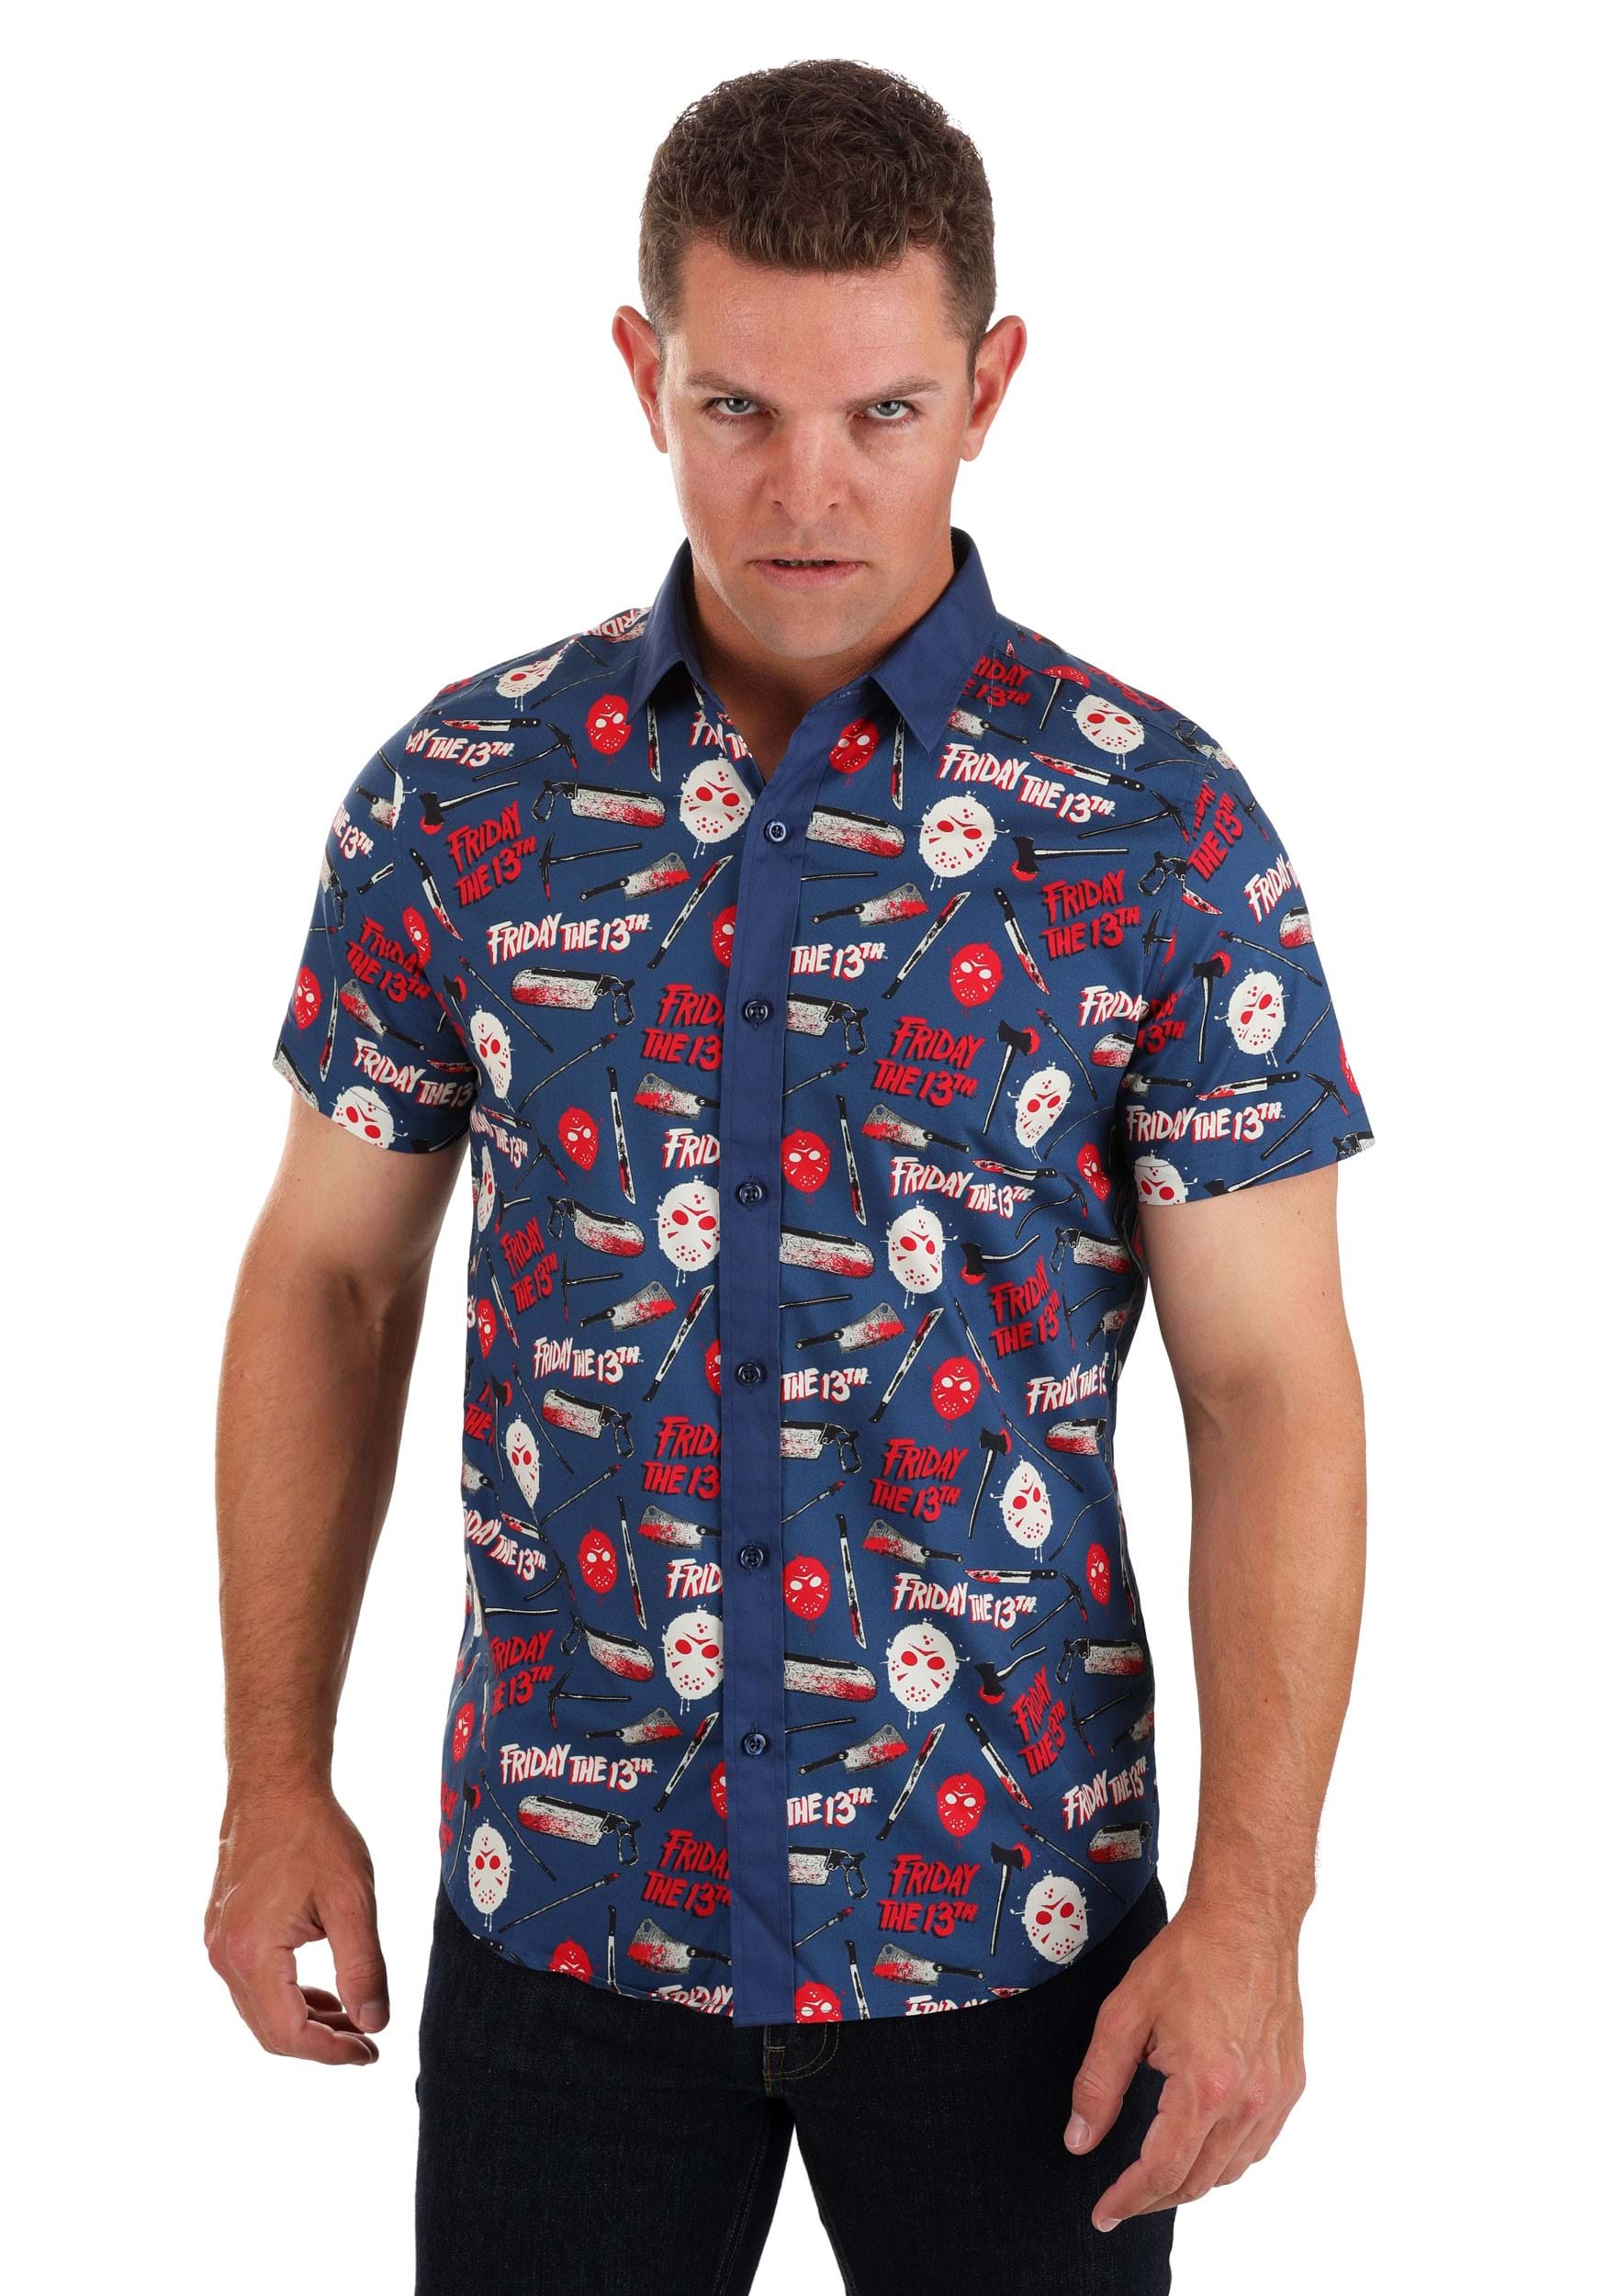 Thrills and Kills Friday the 13th Adult Button Up Shirt